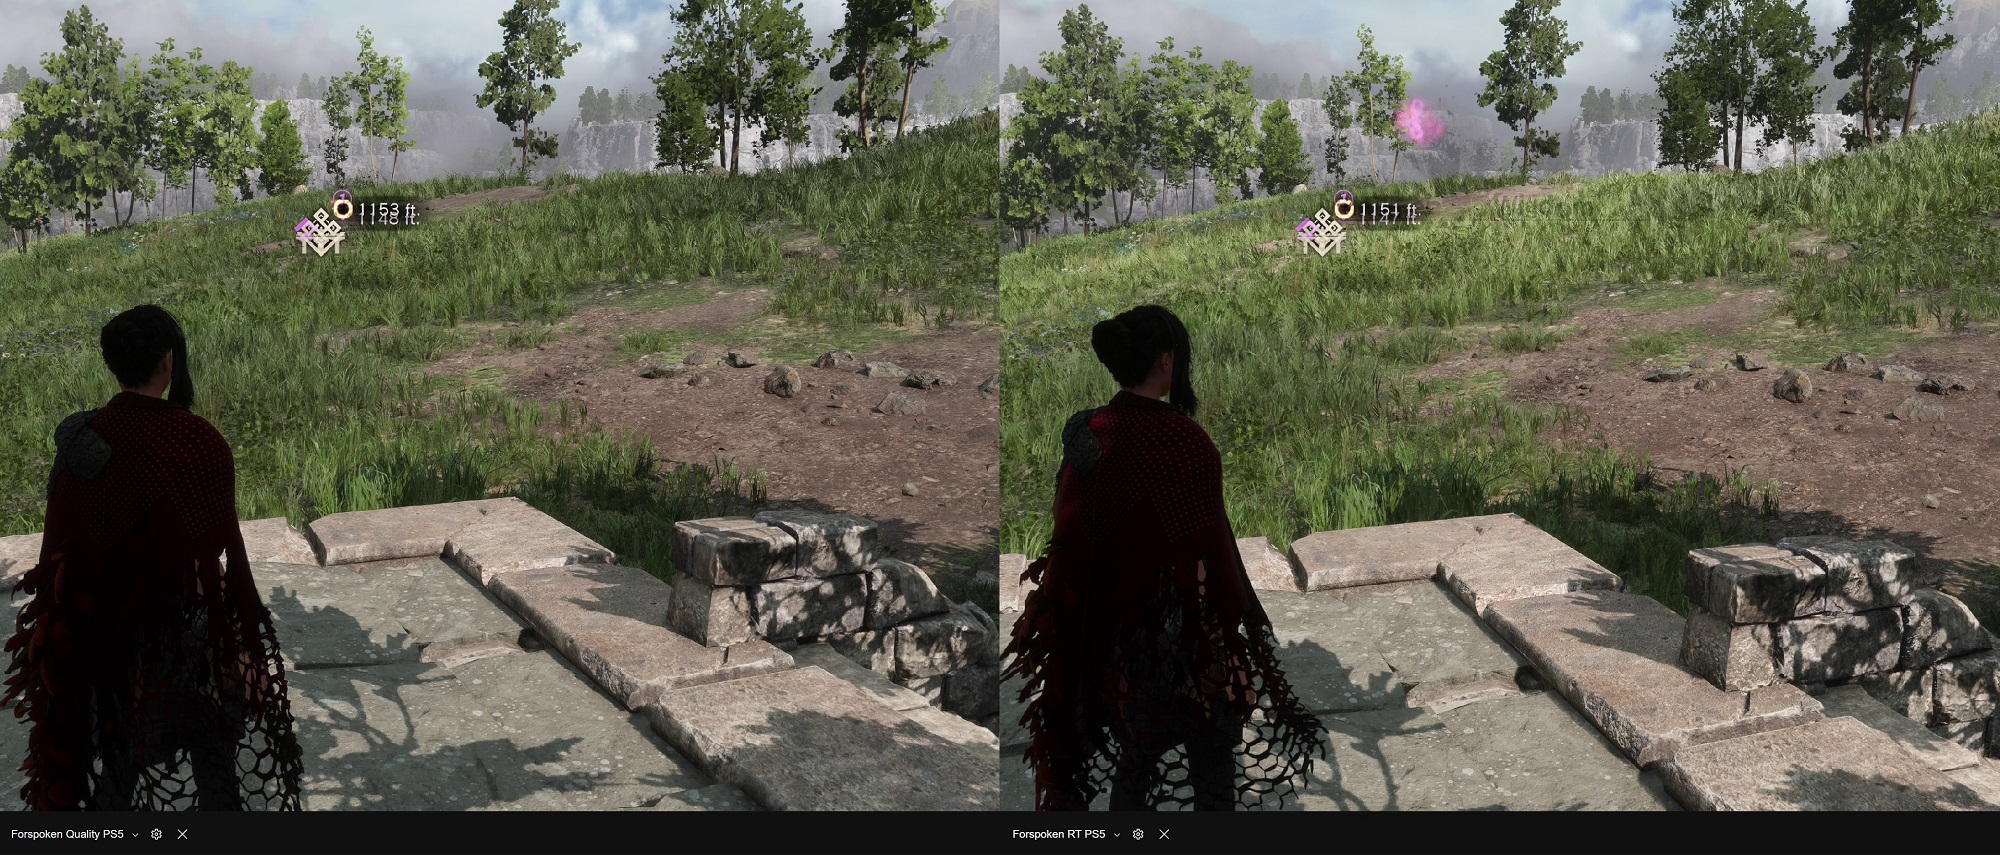 First Forspoken PS5 vs PC RTX 4080 Comparison Highlights Load Times, Visual  Fidelity and Performance